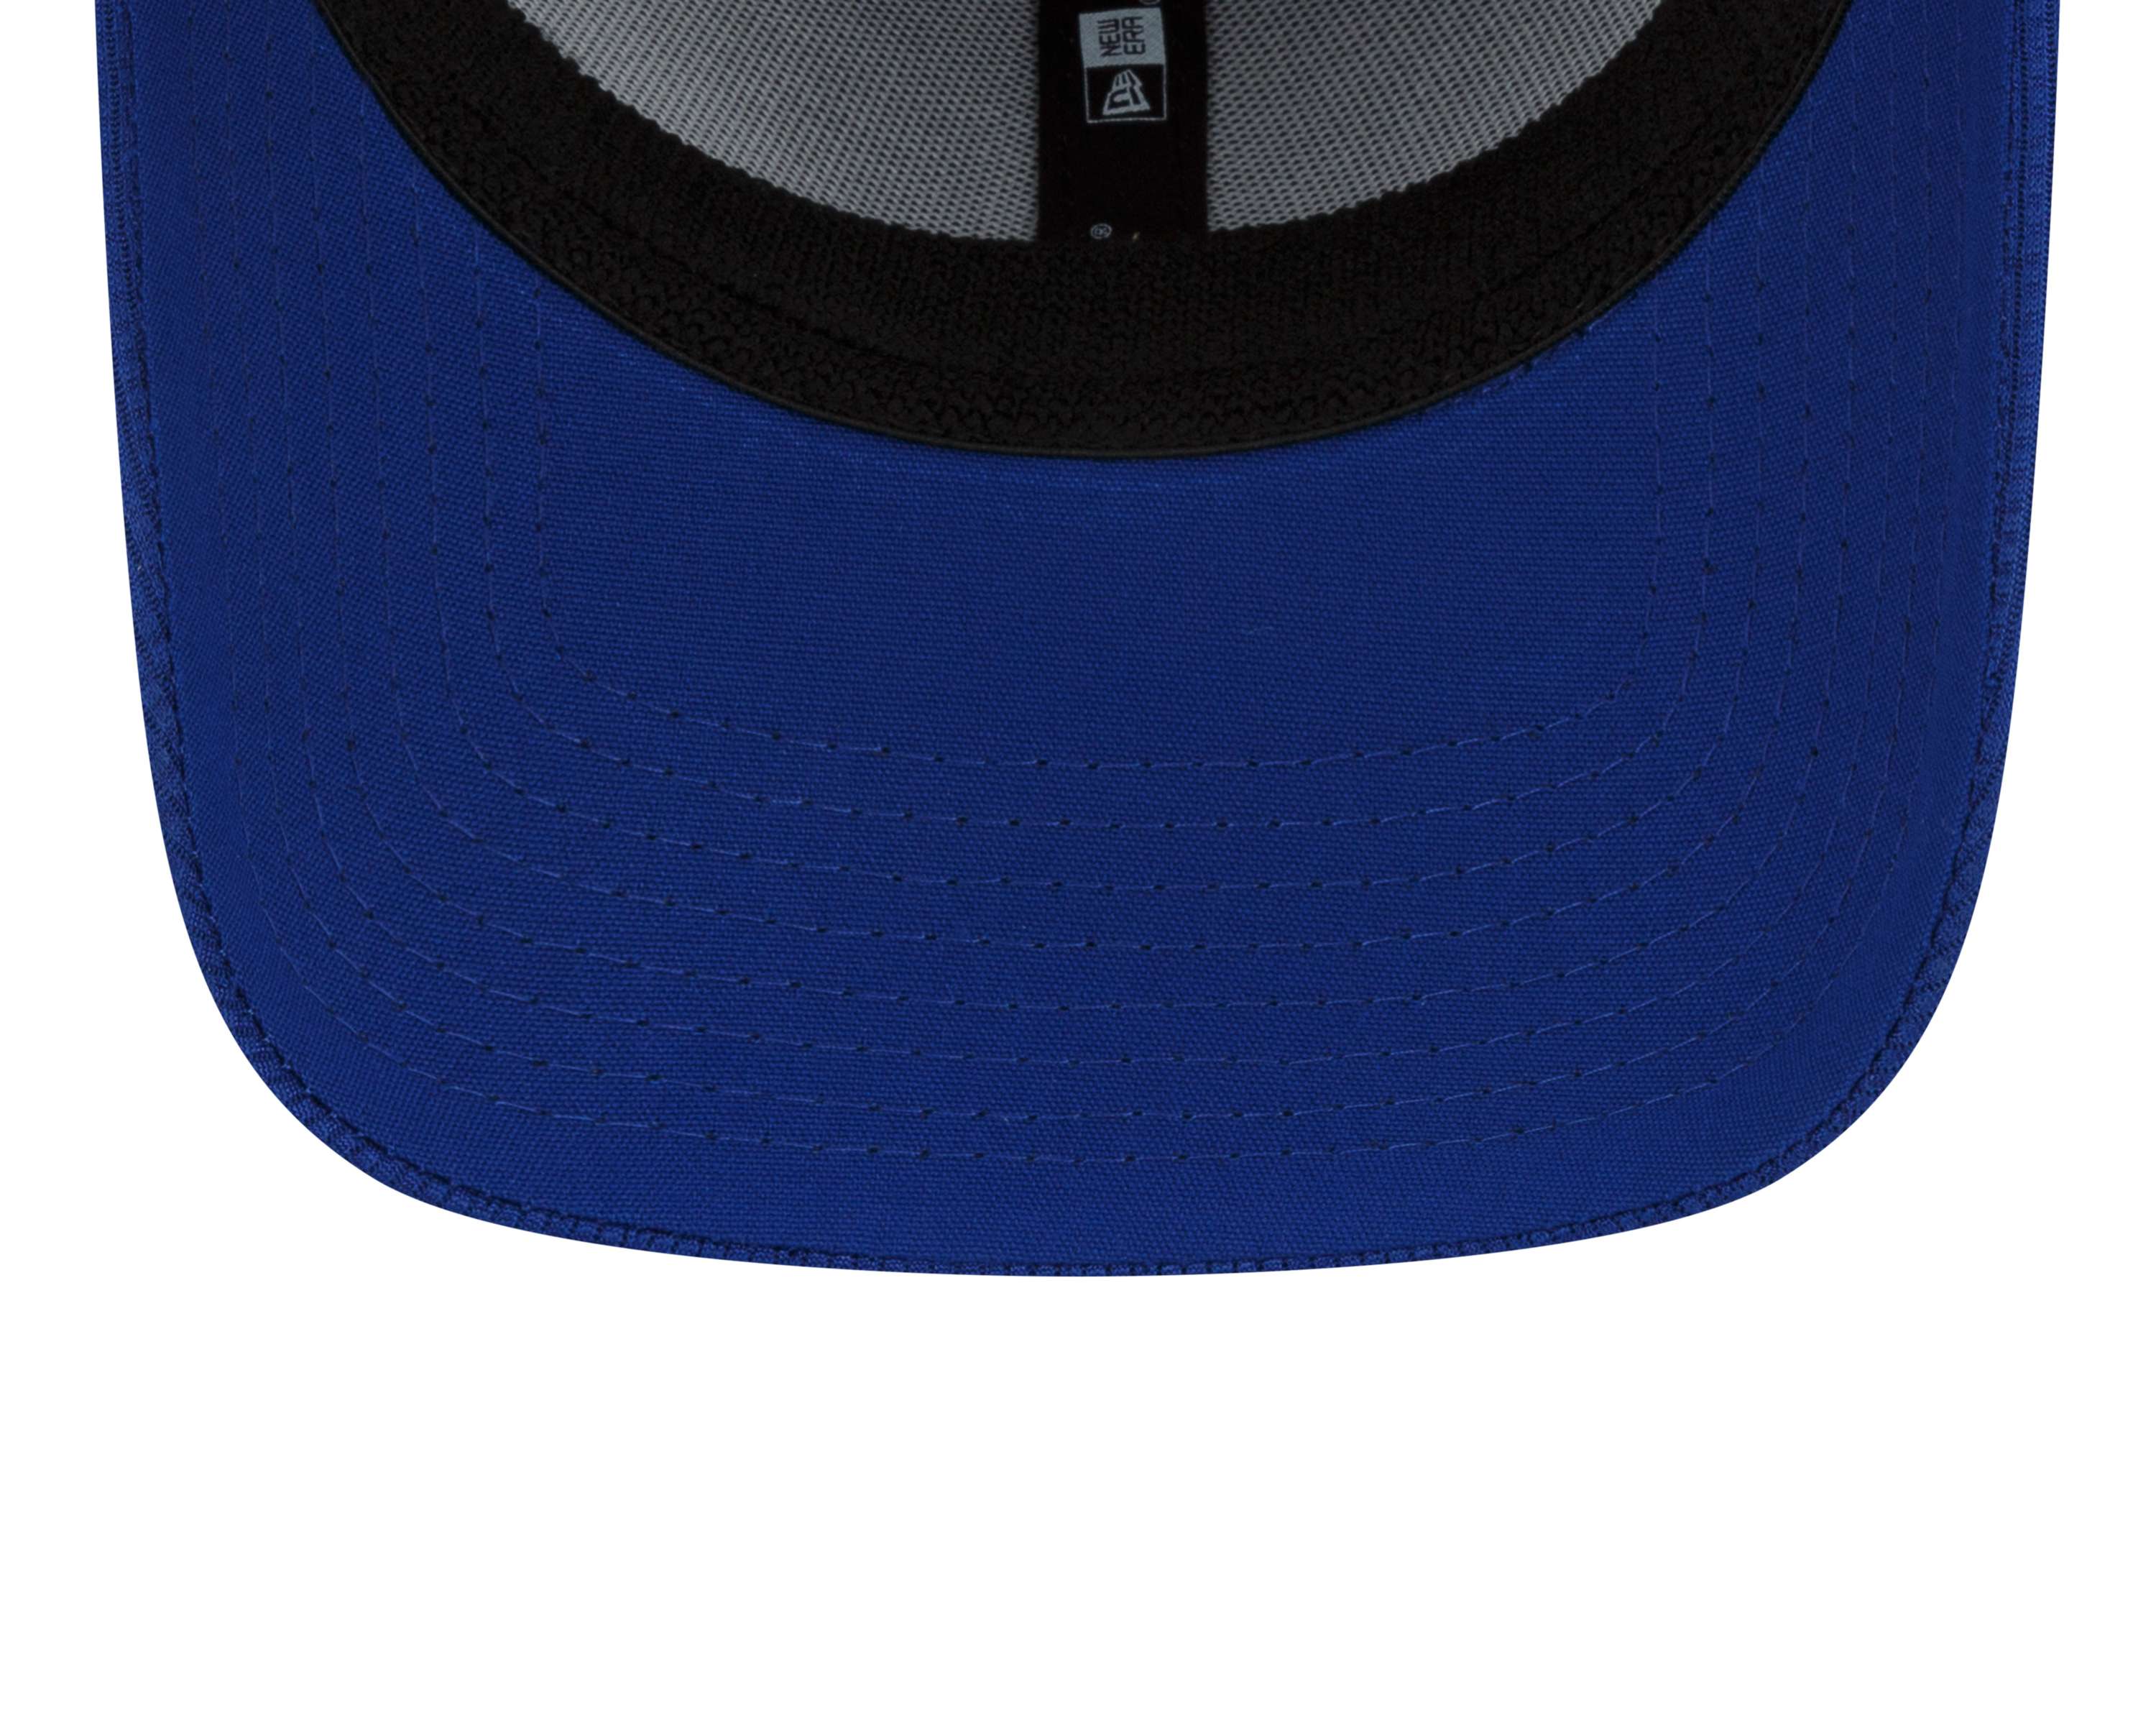 New Era - MLB New York Mets 2022 Clubhouse 39Thirty Stretch Cap